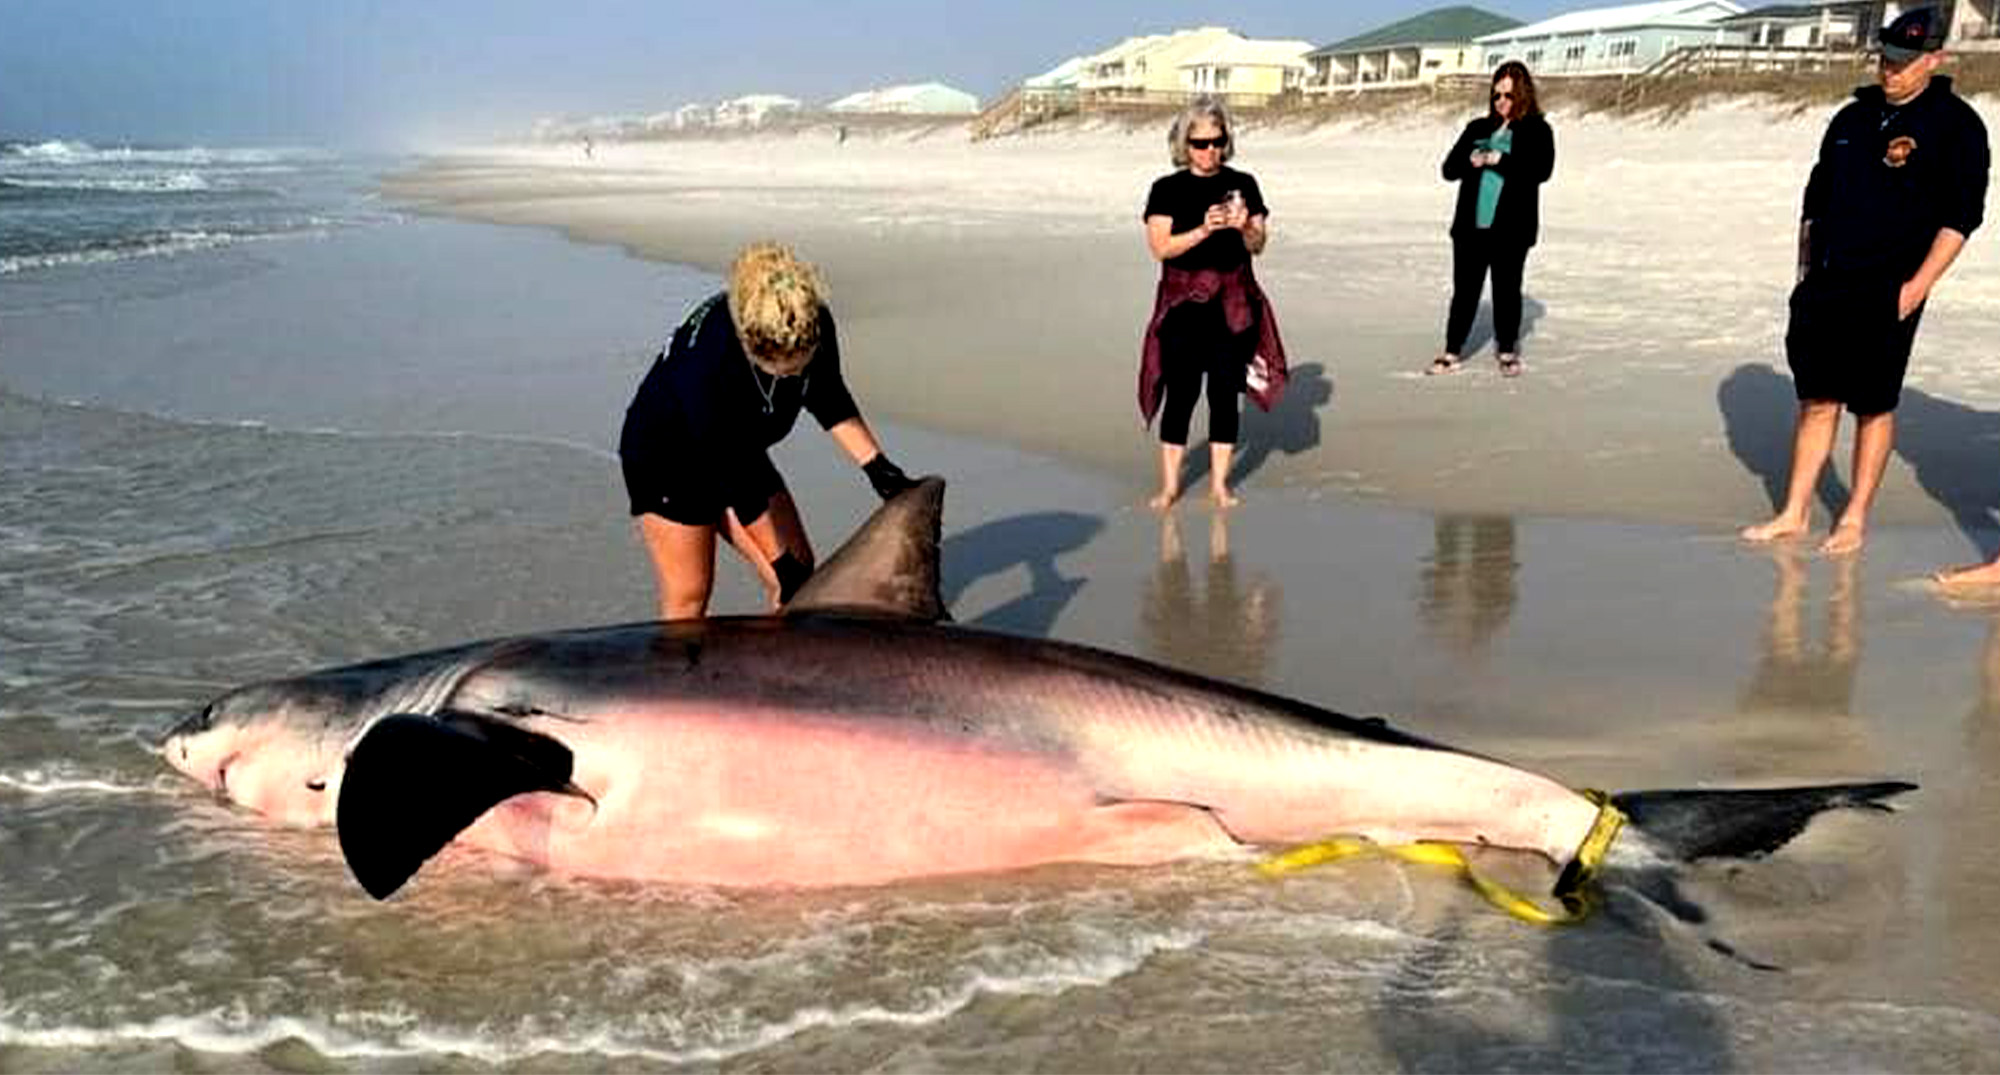 Dead Great White Had Fishing Hook in Its Mouth, Officials Say